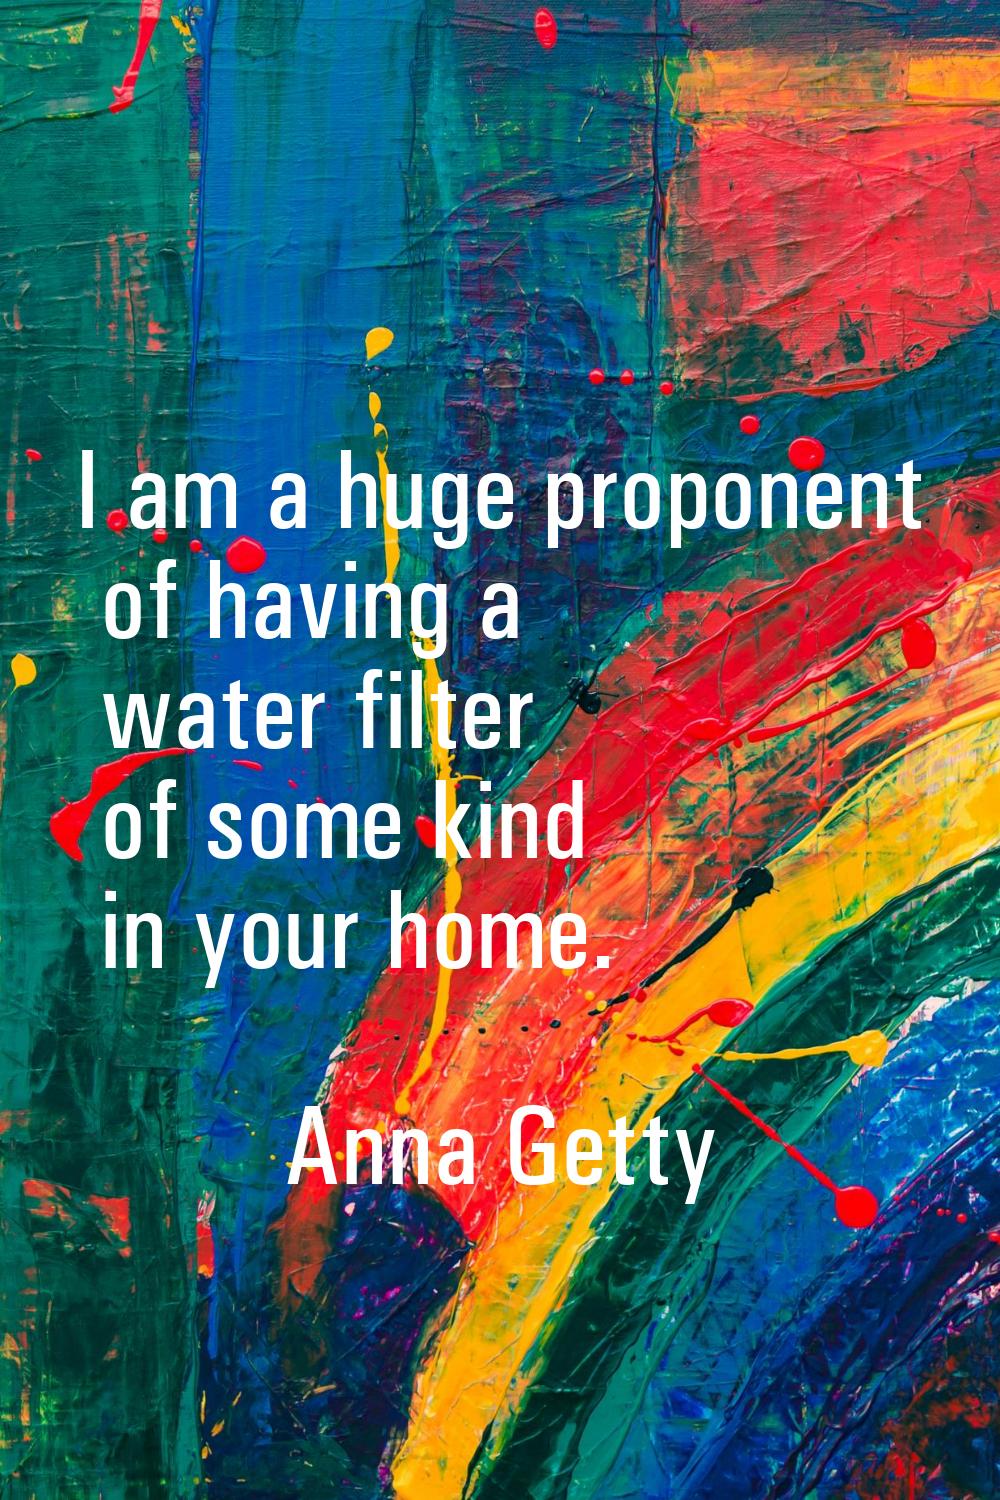 I am a huge proponent of having a water filter of some kind in your home.